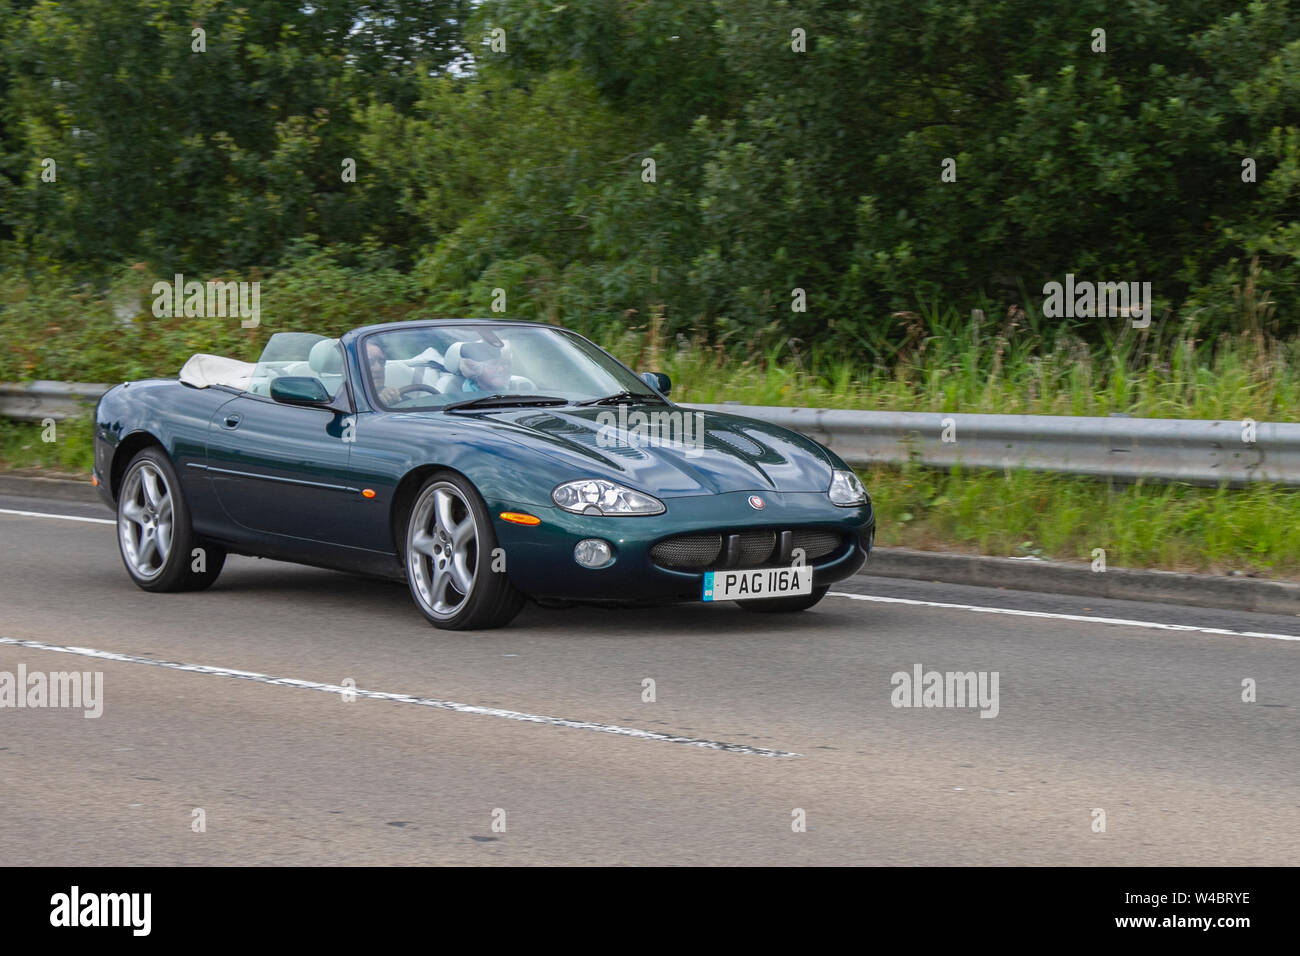 2002 green Jaguar XKR Auto; Tram Sunday 2019; a festival of Transport held the in the seaside town of Fleetwood, Lancashire, UK Stock Photo